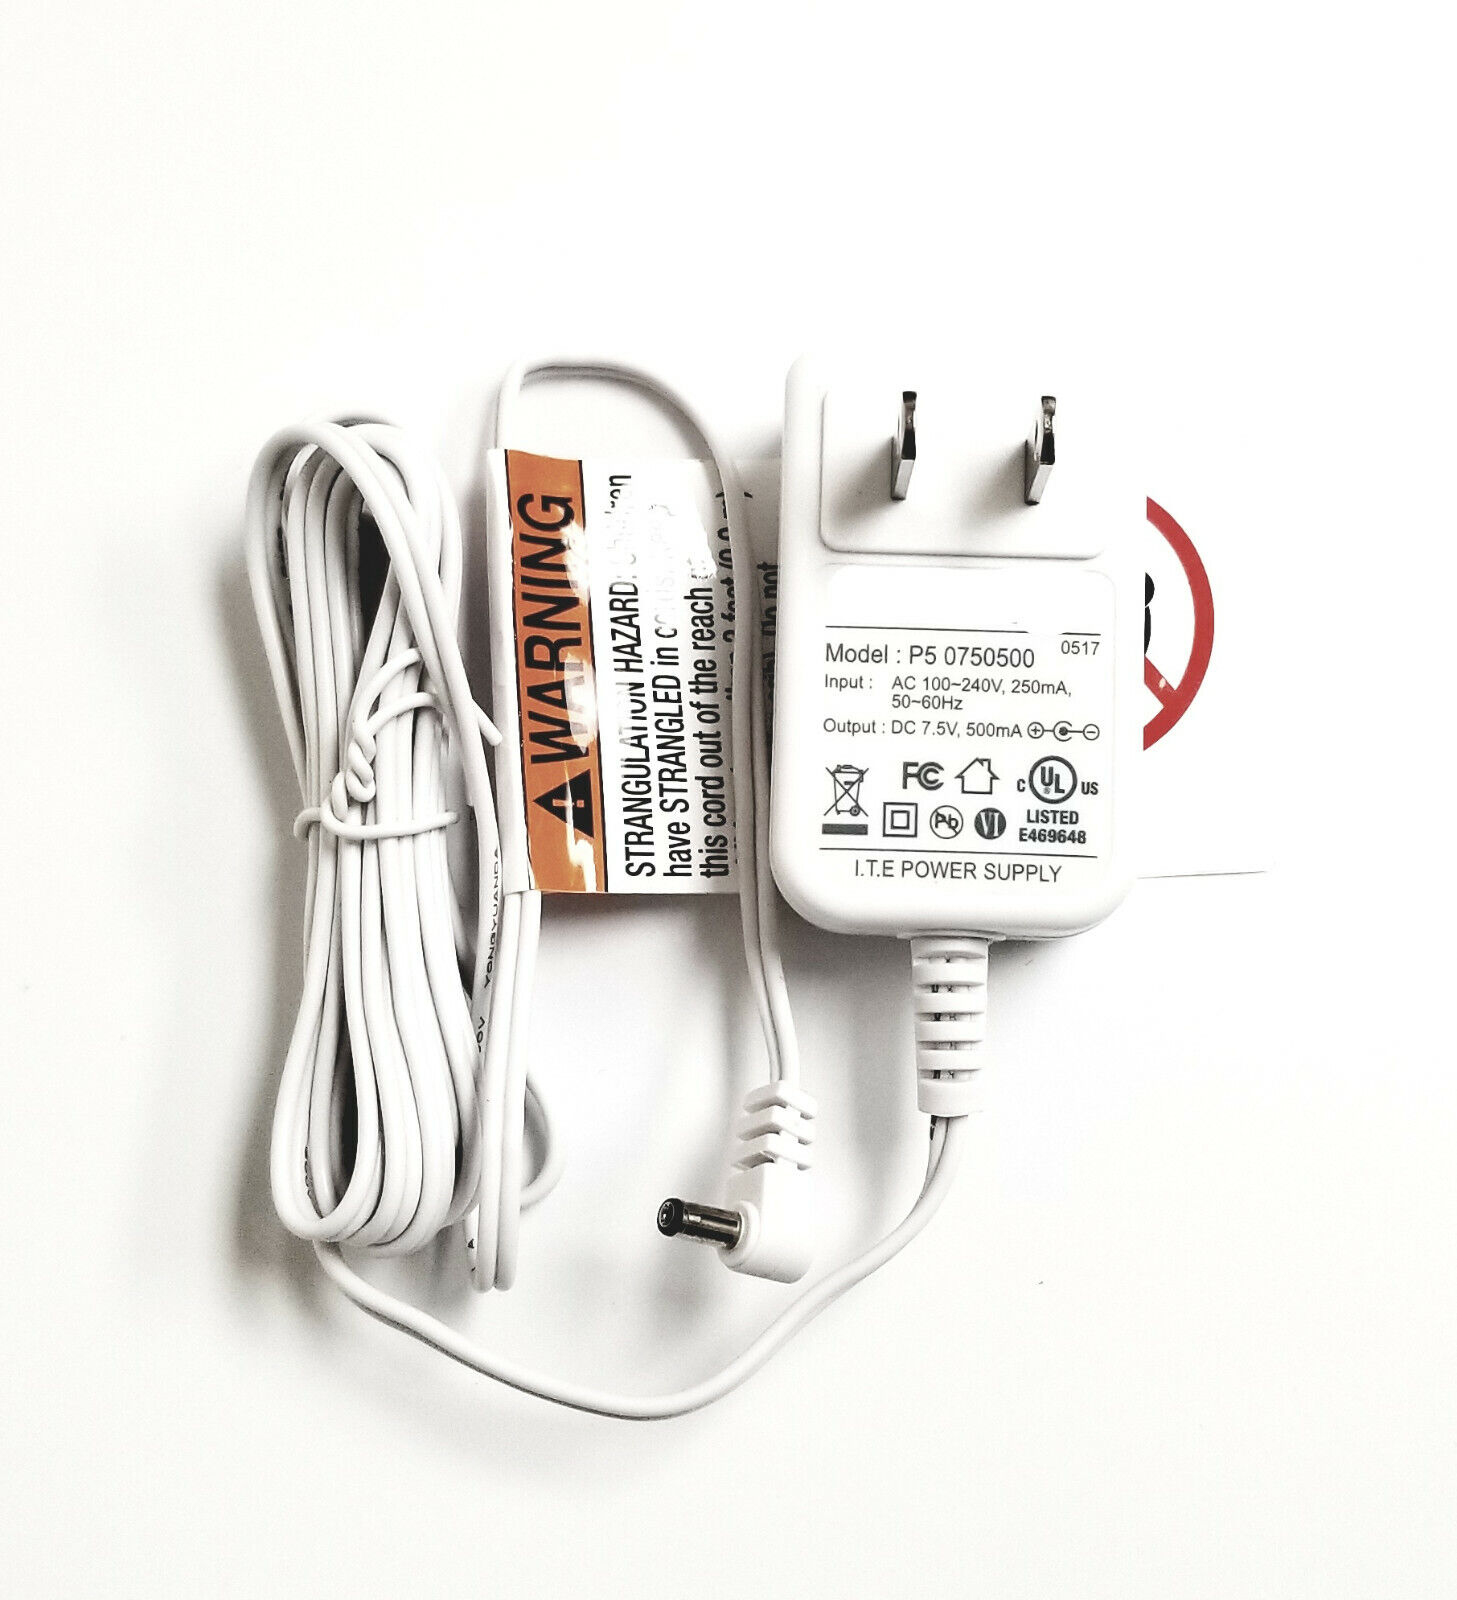 For AXVUE Baby Monitor or Camera AC Power Adapter Charger 7.5v 500mA model no:p5 0750 500 output:DC 7.5v 500ma input:10